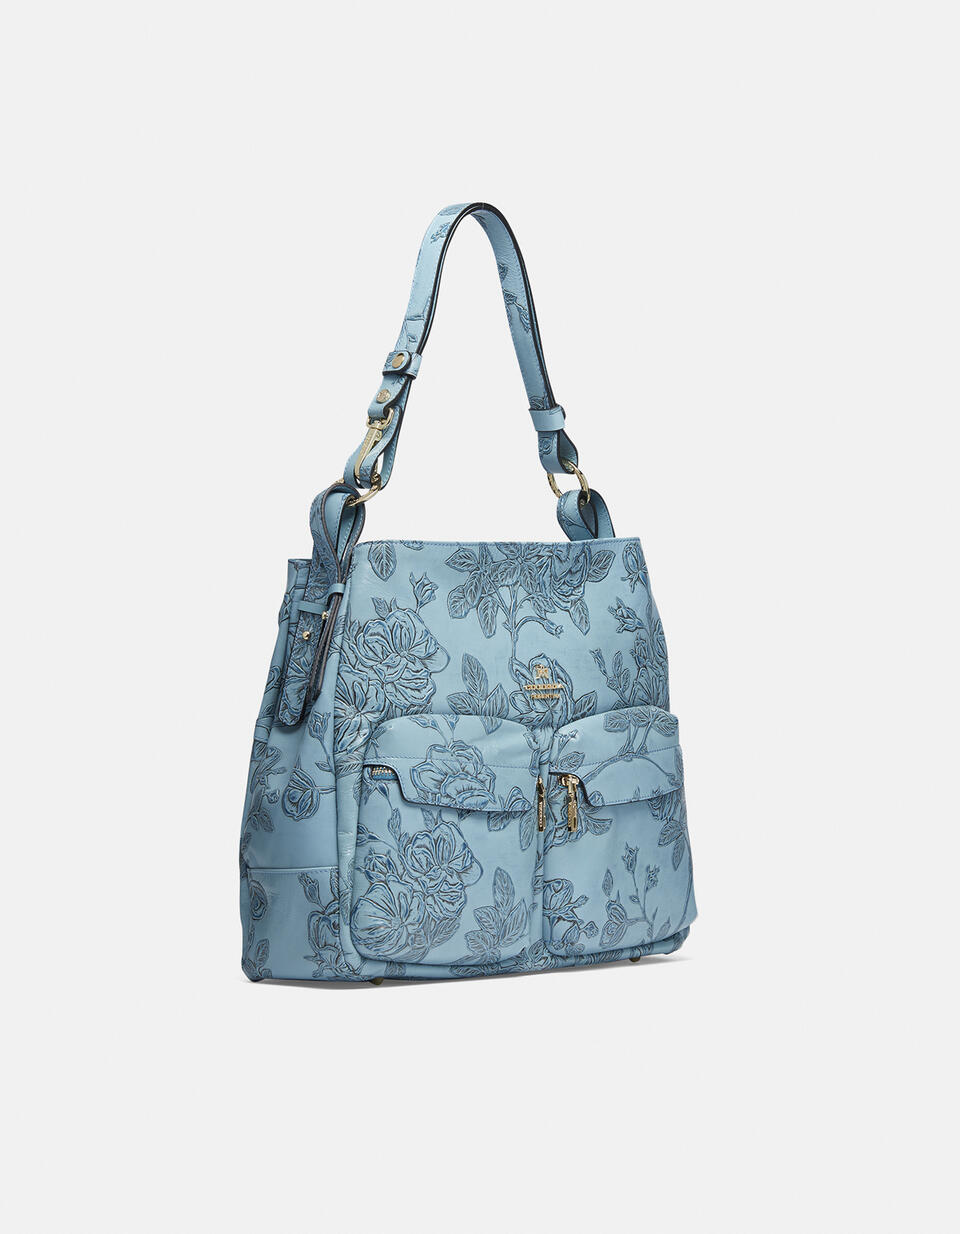 Large bag with shoulder strap - Shoulder Bags - WOMEN'S BAGS | bags Mimì CELESTE - Shoulder Bags - WOMEN'S BAGS | bagsCuoieria Fiorentina